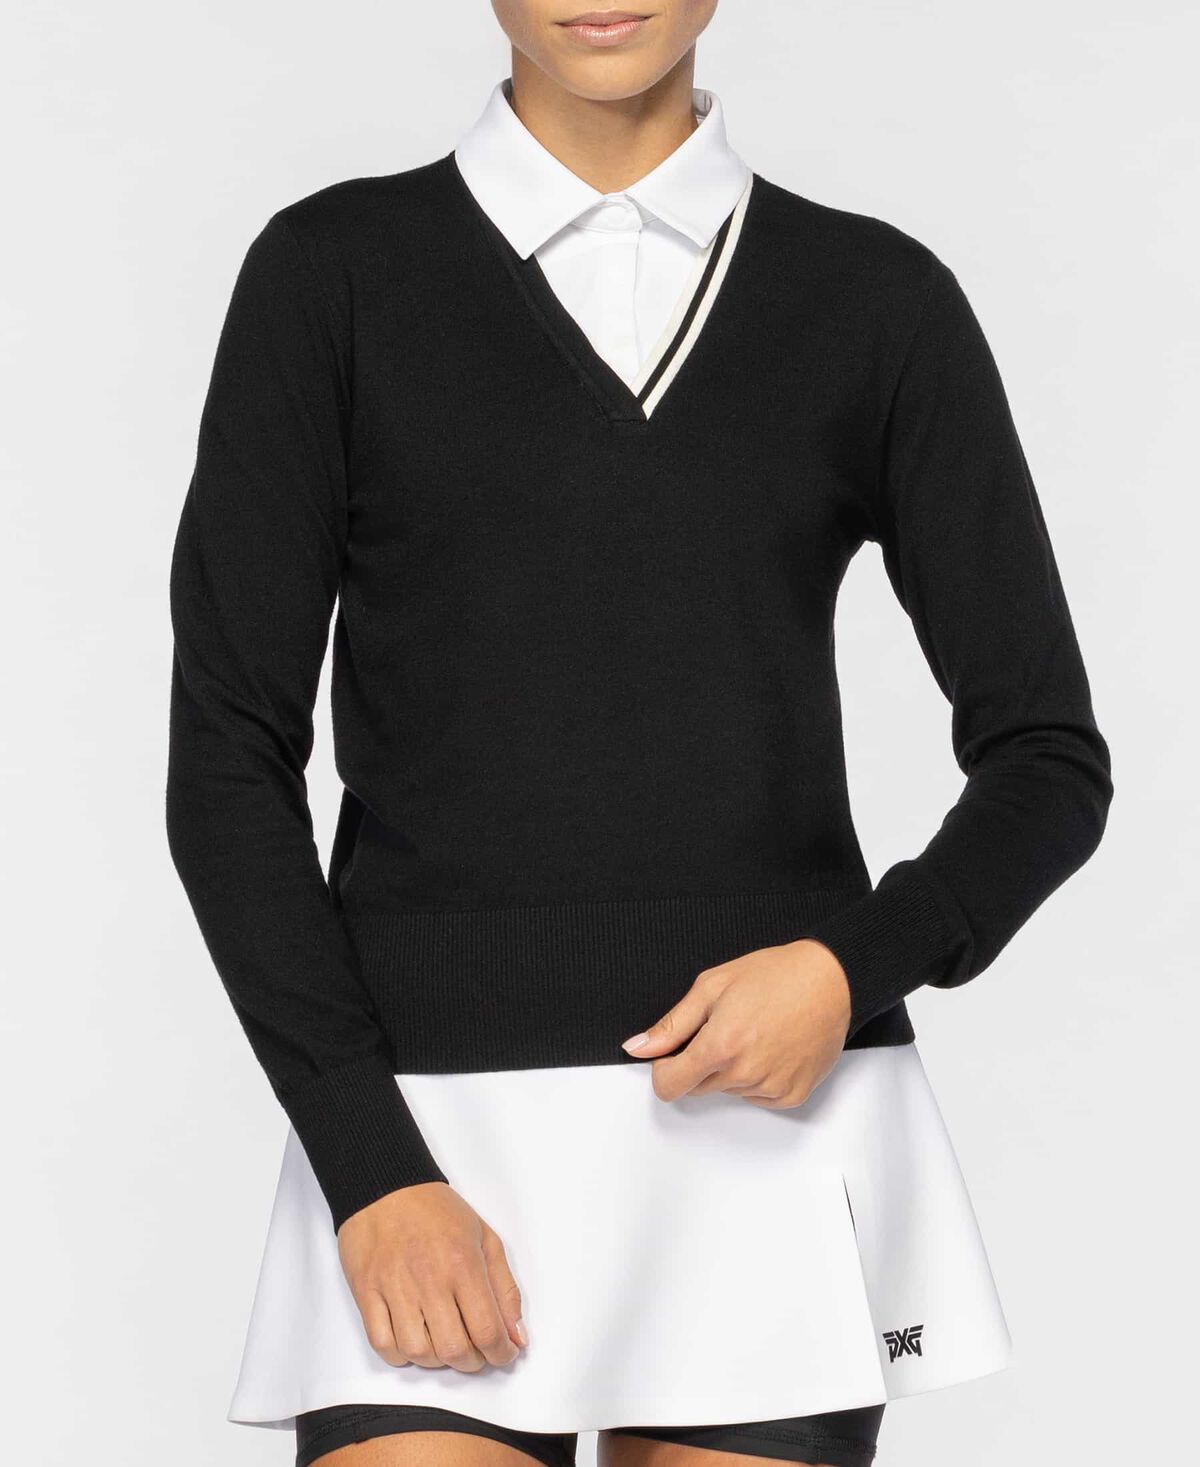 Women's Collared Two-In-One Sweater - Black - Medium 